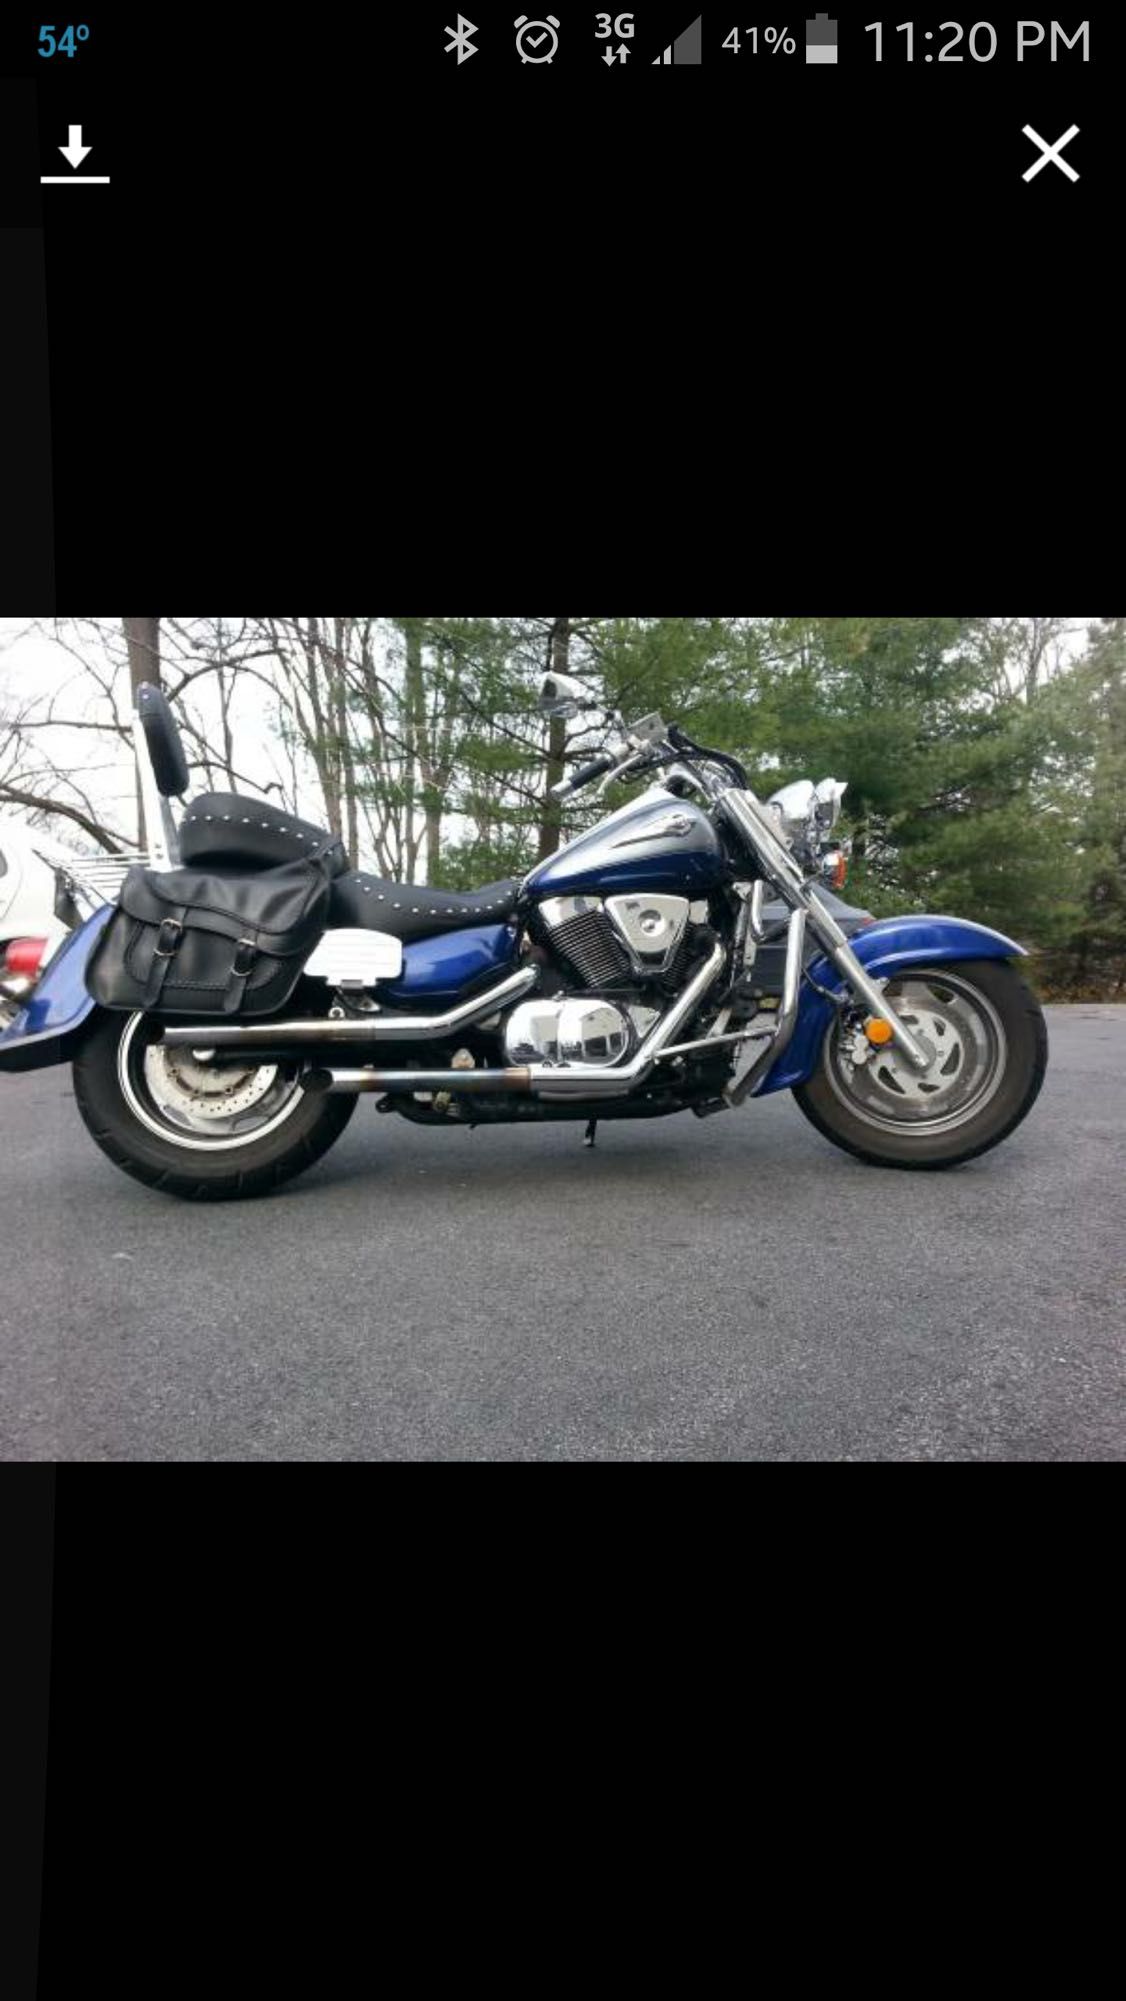 anyone in ct looking to ride?